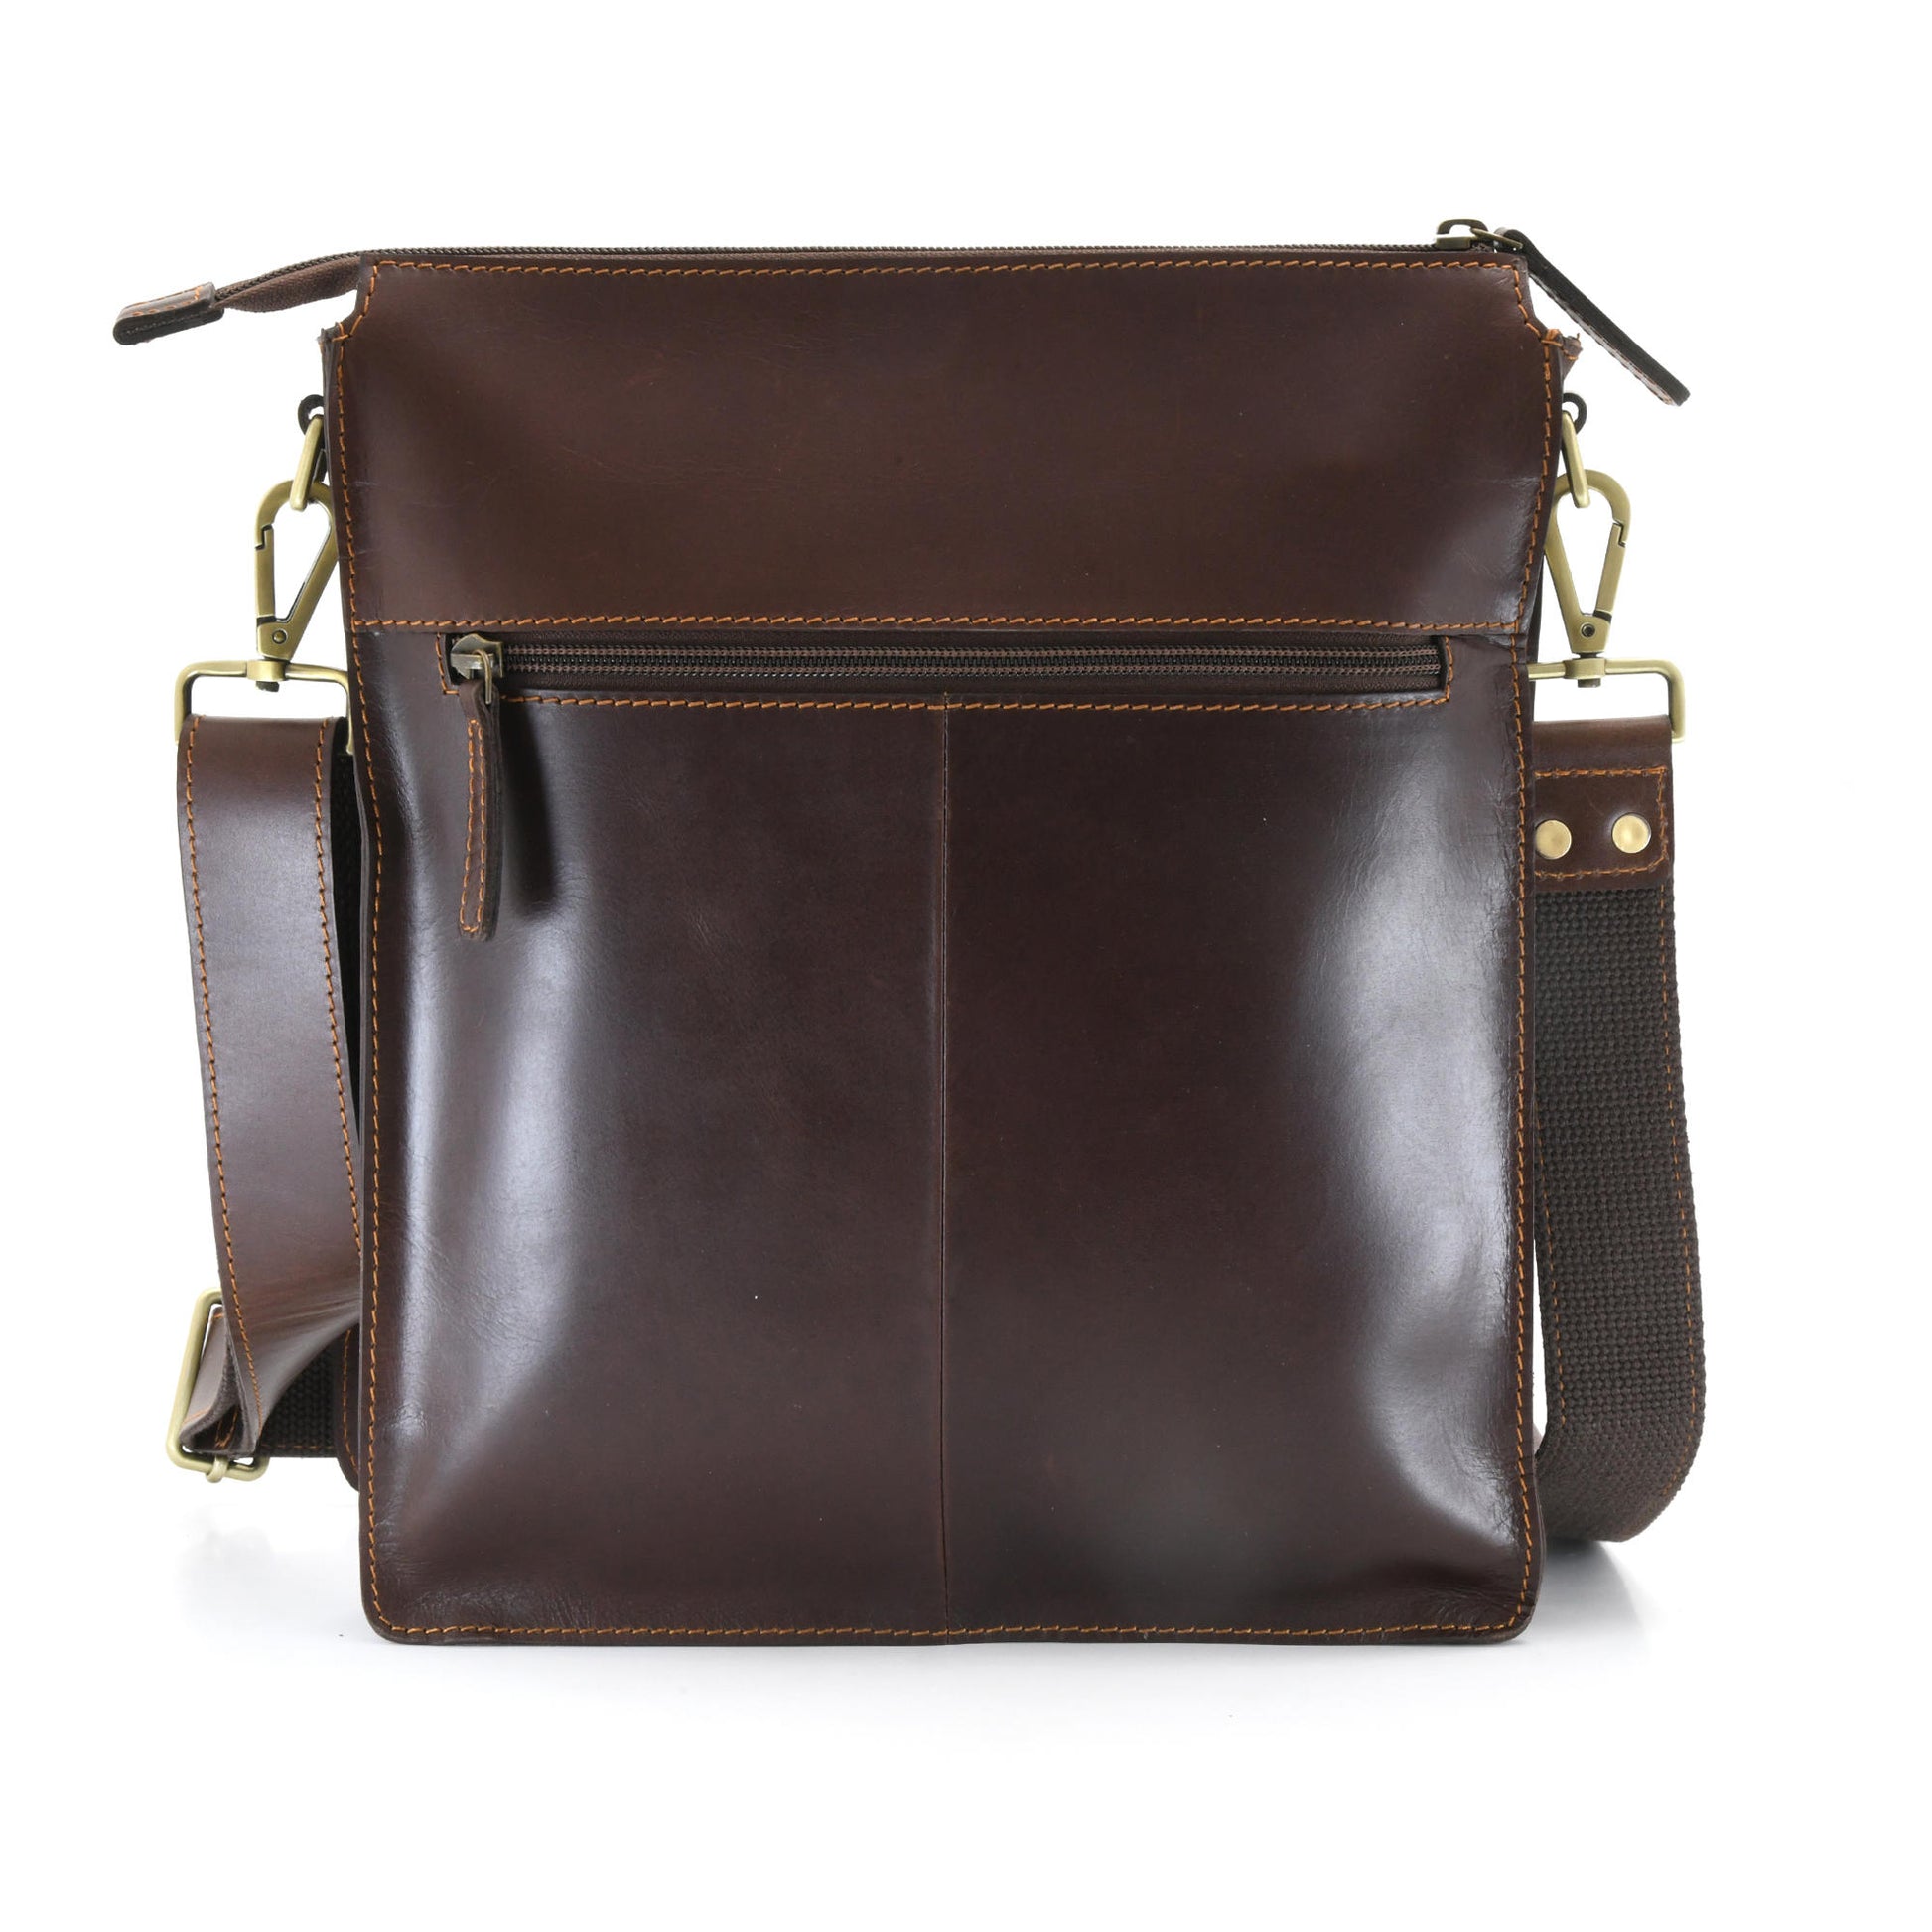 Style n Craft 392002 Tall Messenger Bag in Full Grain Dark Brown Leather - Back  View Showing the Zipper Pocket